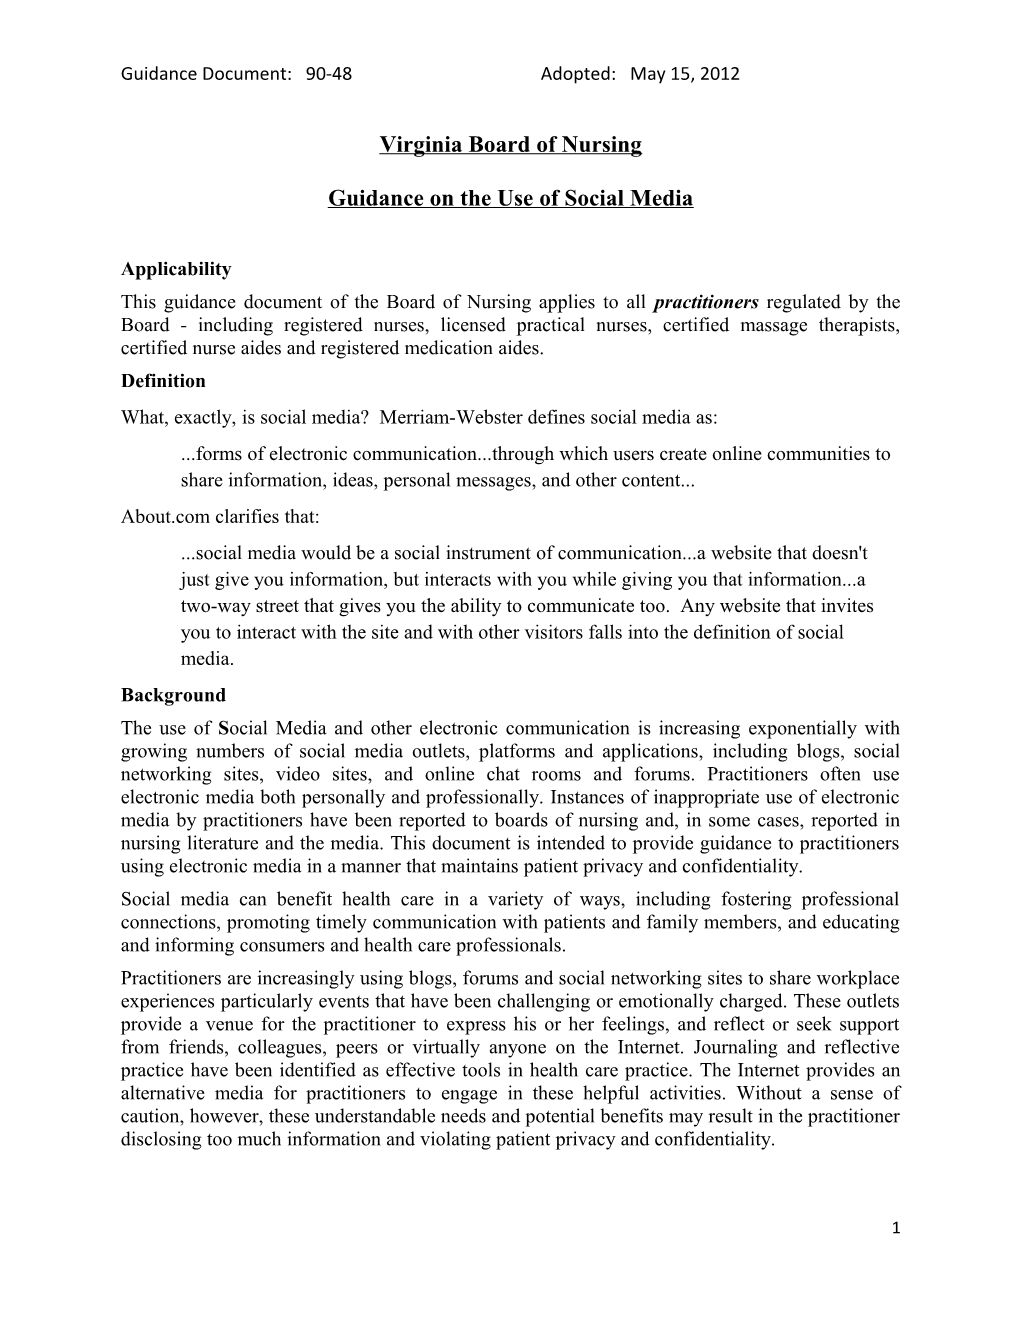 Guidance on the Use of Social Media